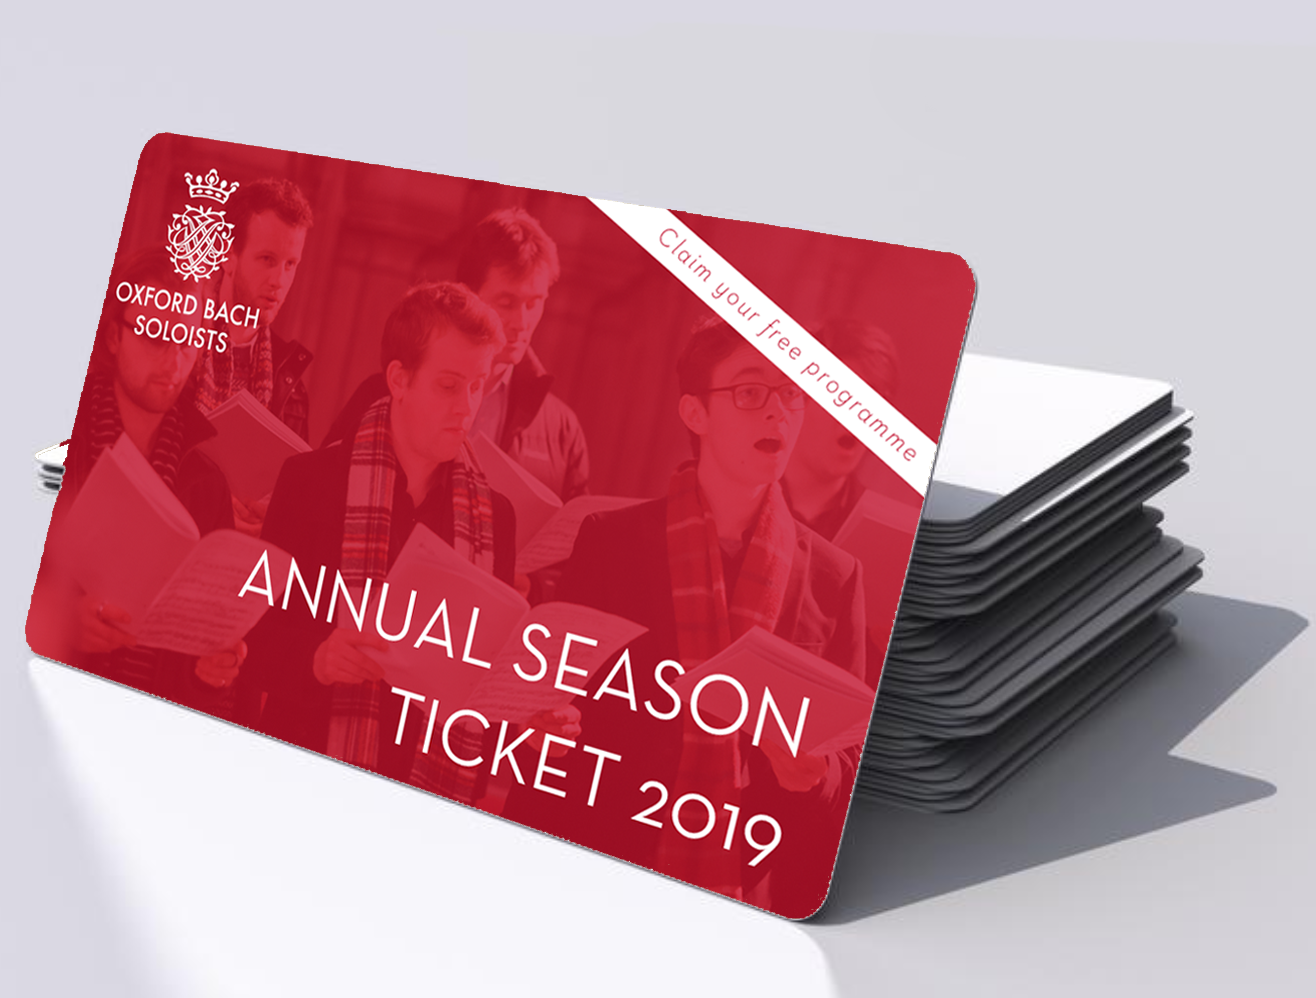 Announcing our new Annual Season Ticket